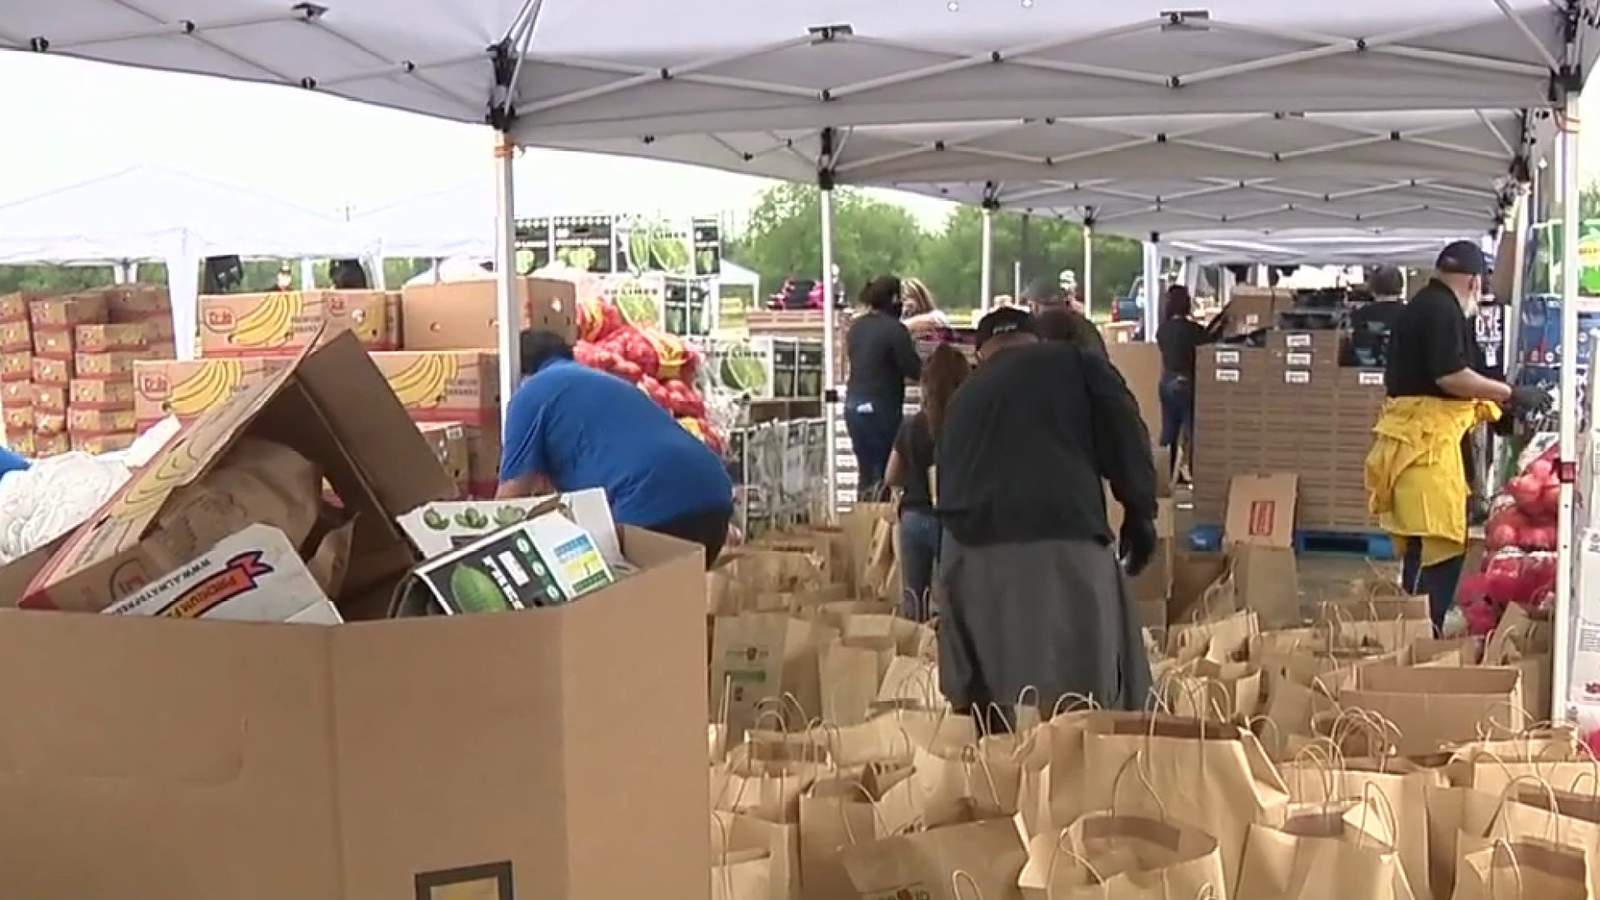 1,200 families receive donations from SA Food Bank mega distribution site